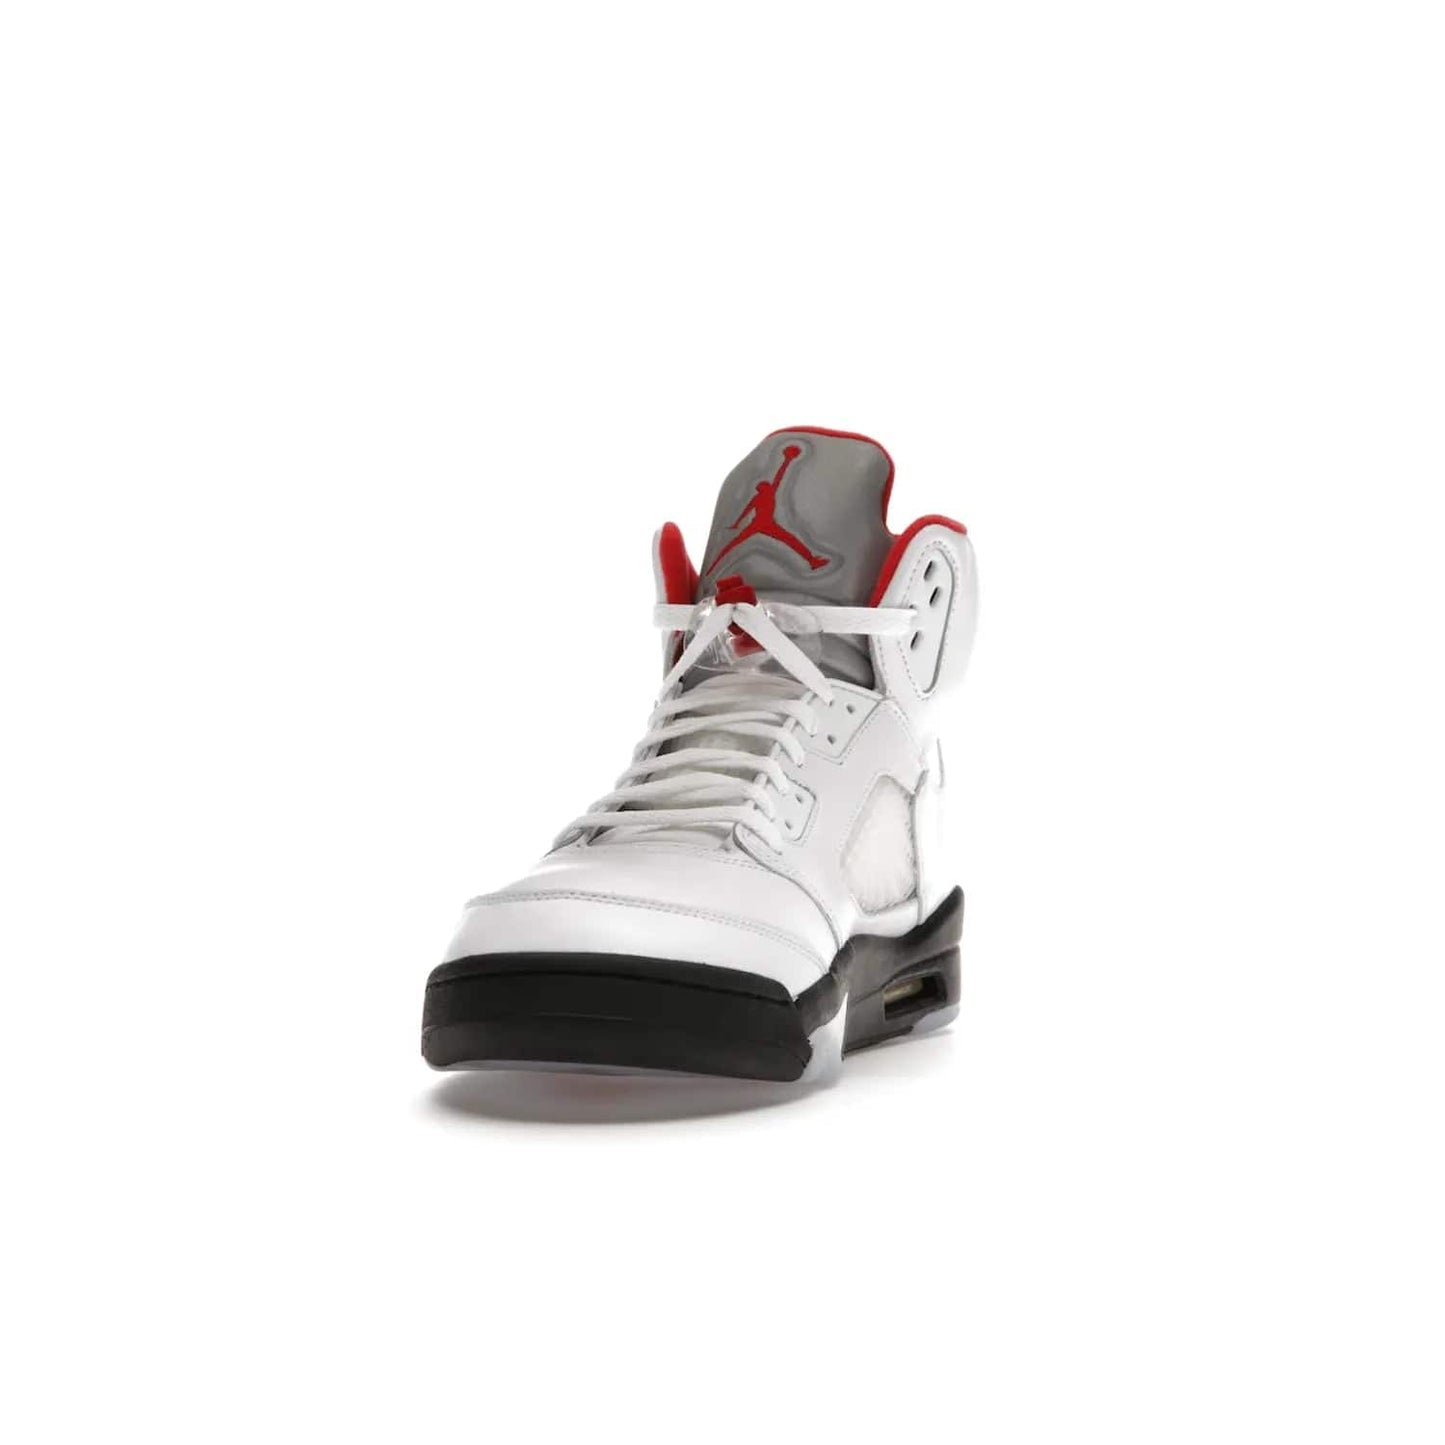 Jordan 5 Retro Fire Red Silver Tongue (2020) - Image 12 - Only at www.BallersClubKickz.com - Experience classic styling with the Jordan 5 Retro Fire Red Silver Tongue (2020). Features a white leather upper, 3M reflective tongue, midsole colorblocking, and an icy translucent outsole. Now available, upgrade your shoe collection today.